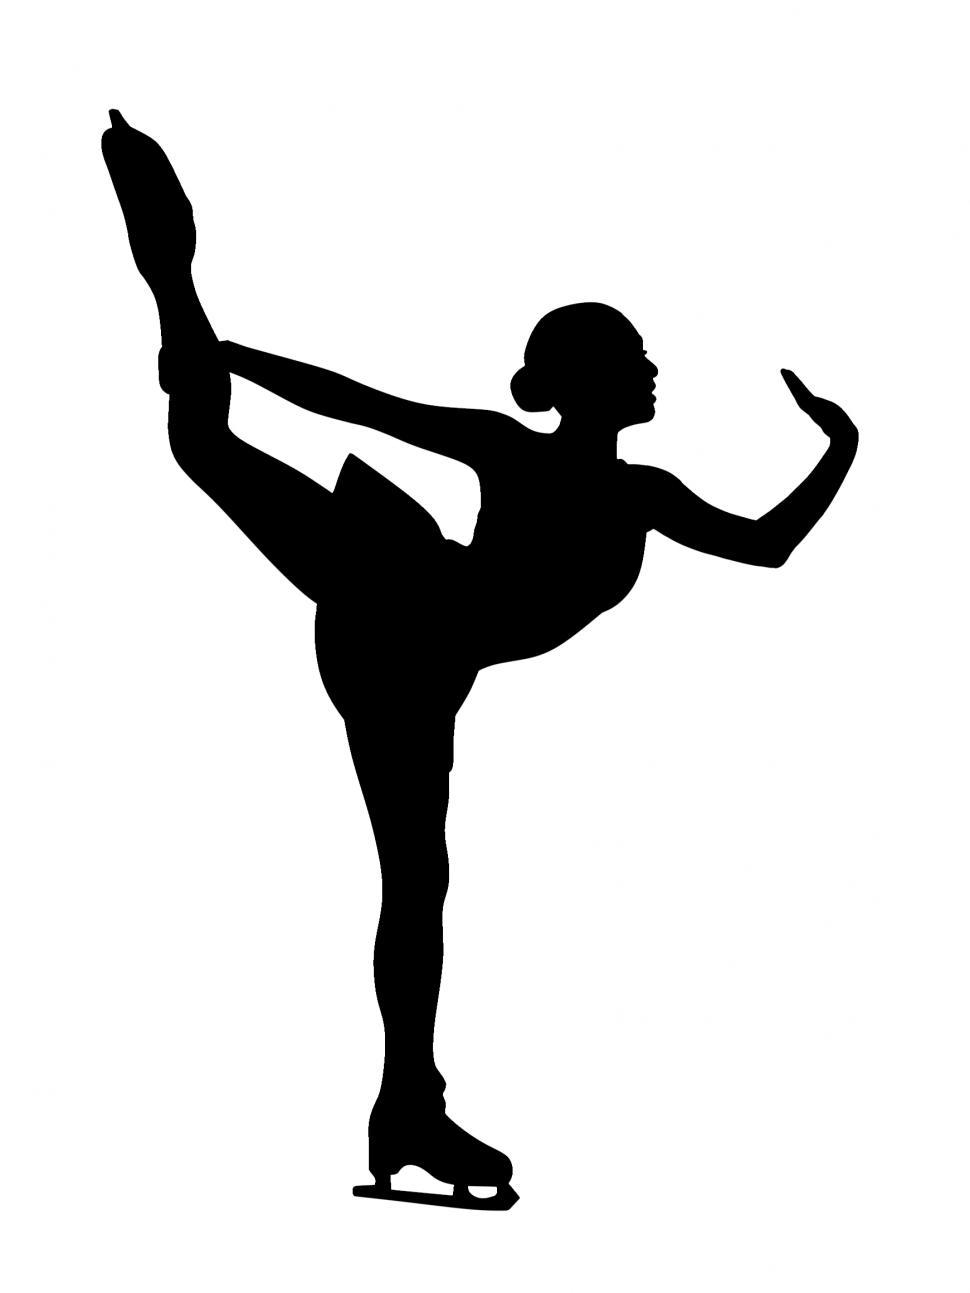 Free Image of Skating silhouette  